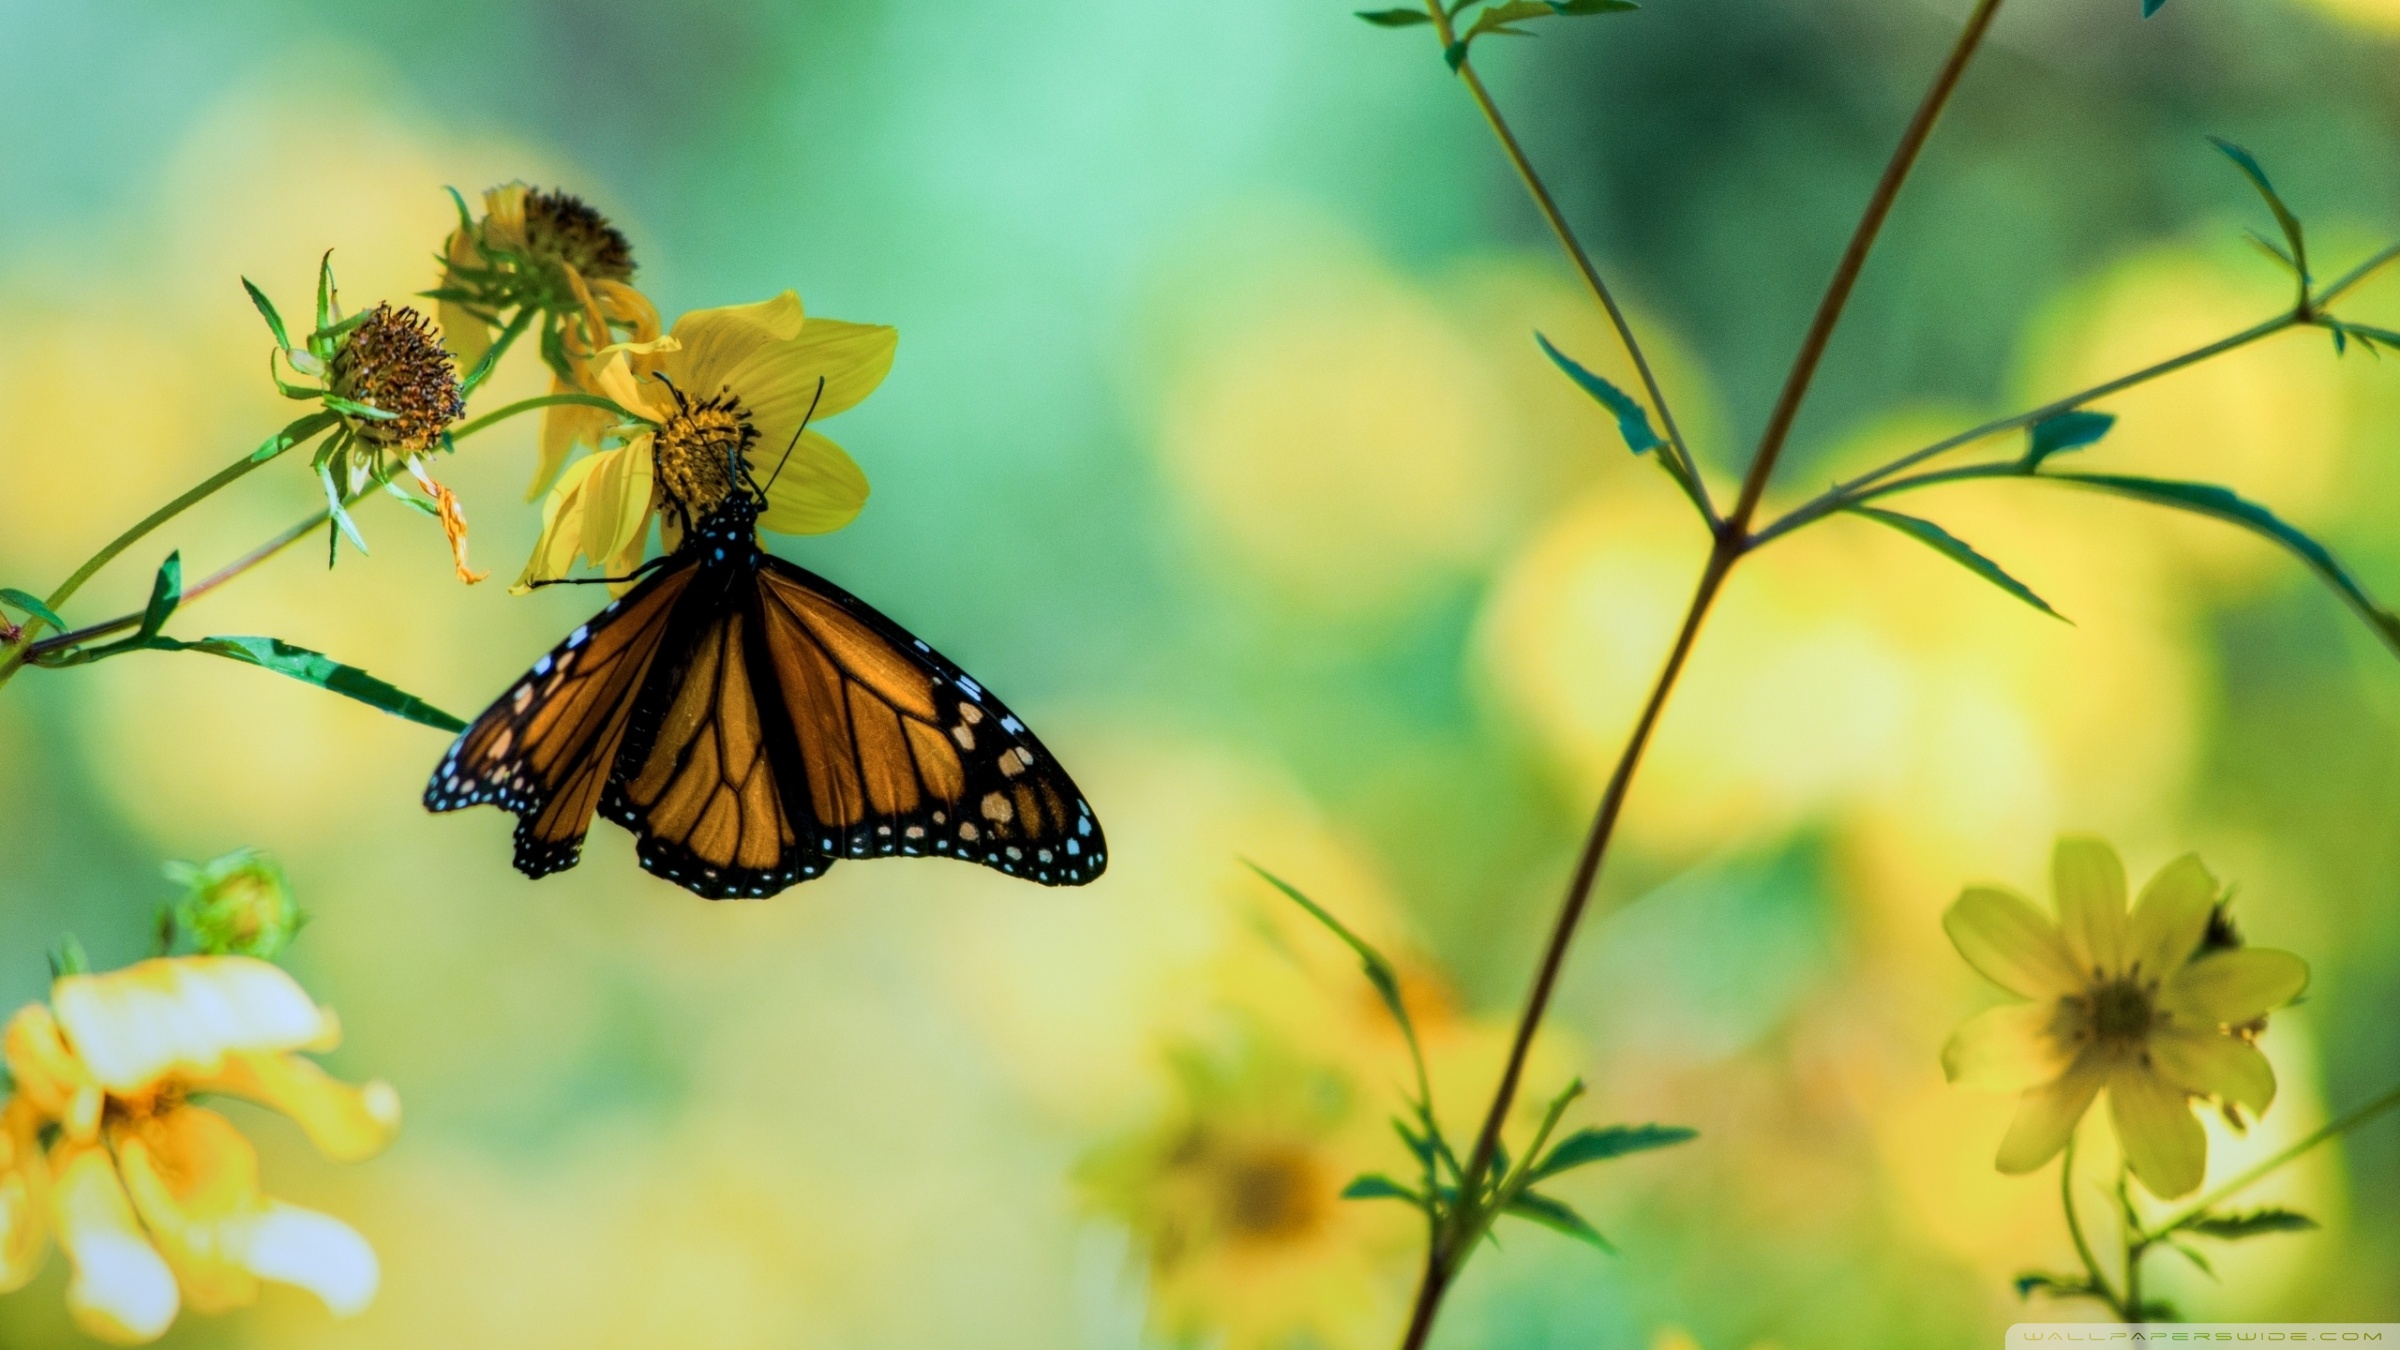 Butterfly Wallpapers Images  Free Download on Freepik